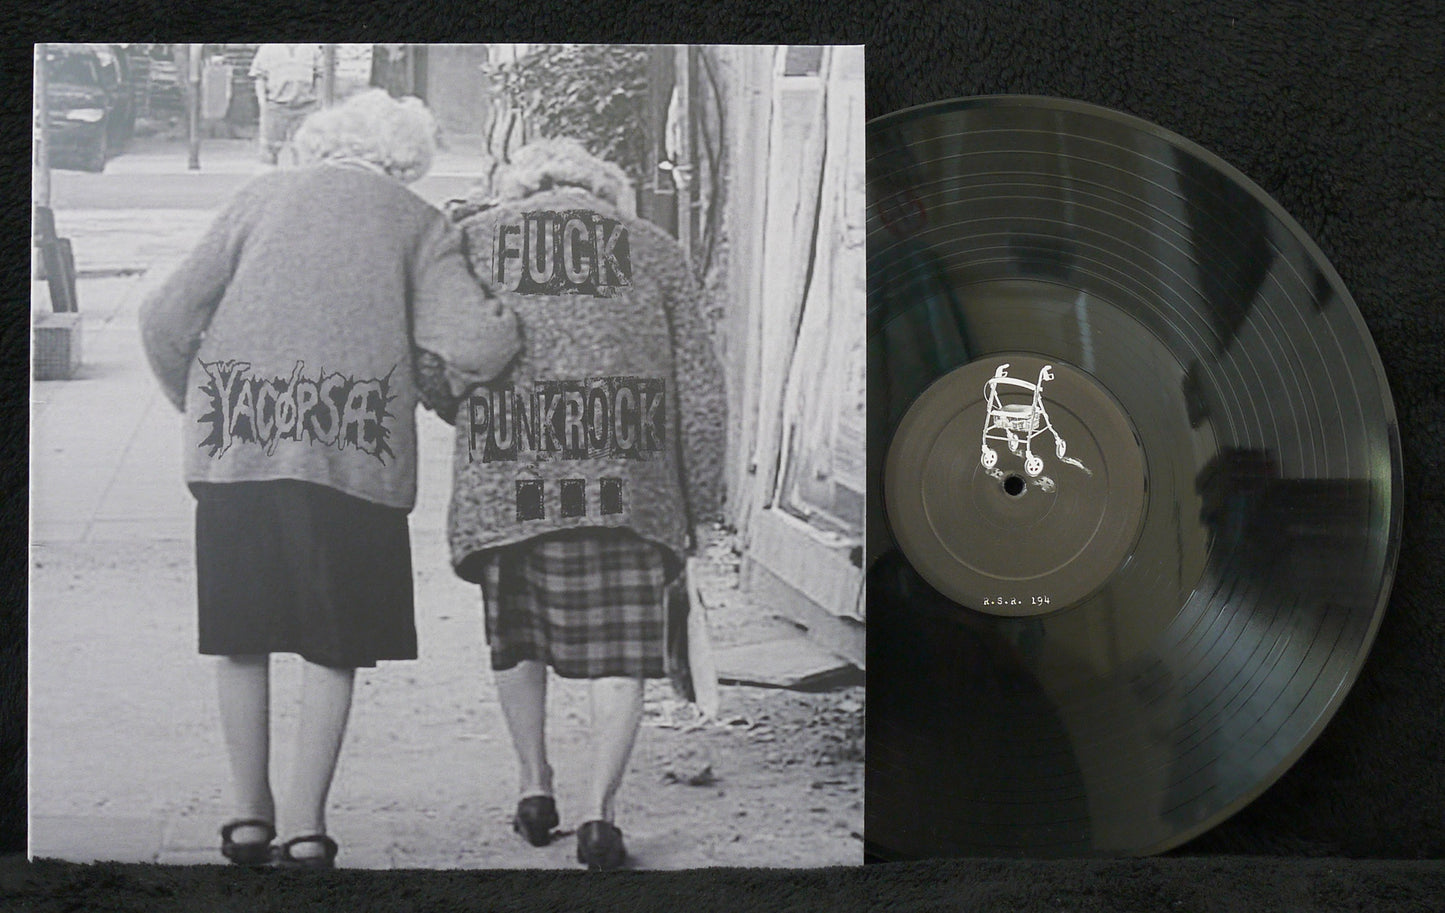 YACOPSAE - Fuck Punk Rock.... This Is Turbo Speed Violence 12"